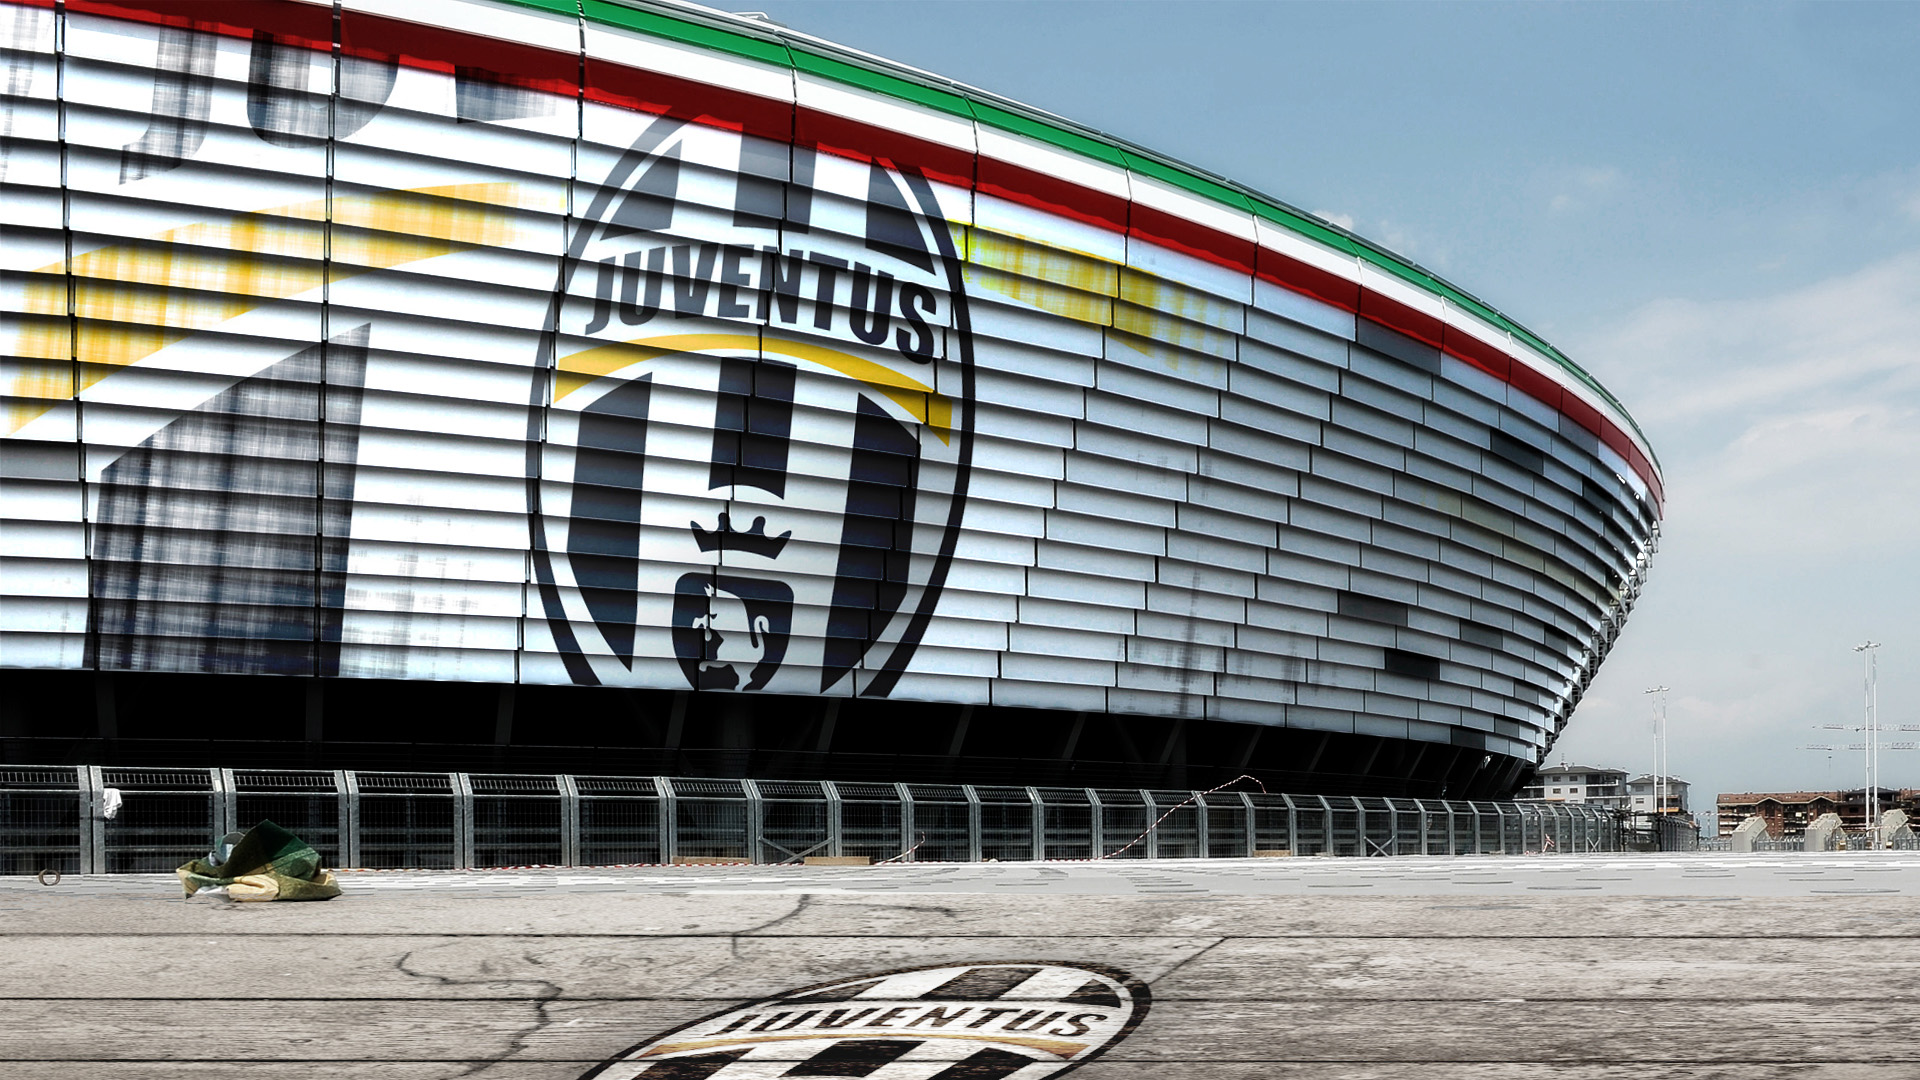 Juventus Wallpaper For Android